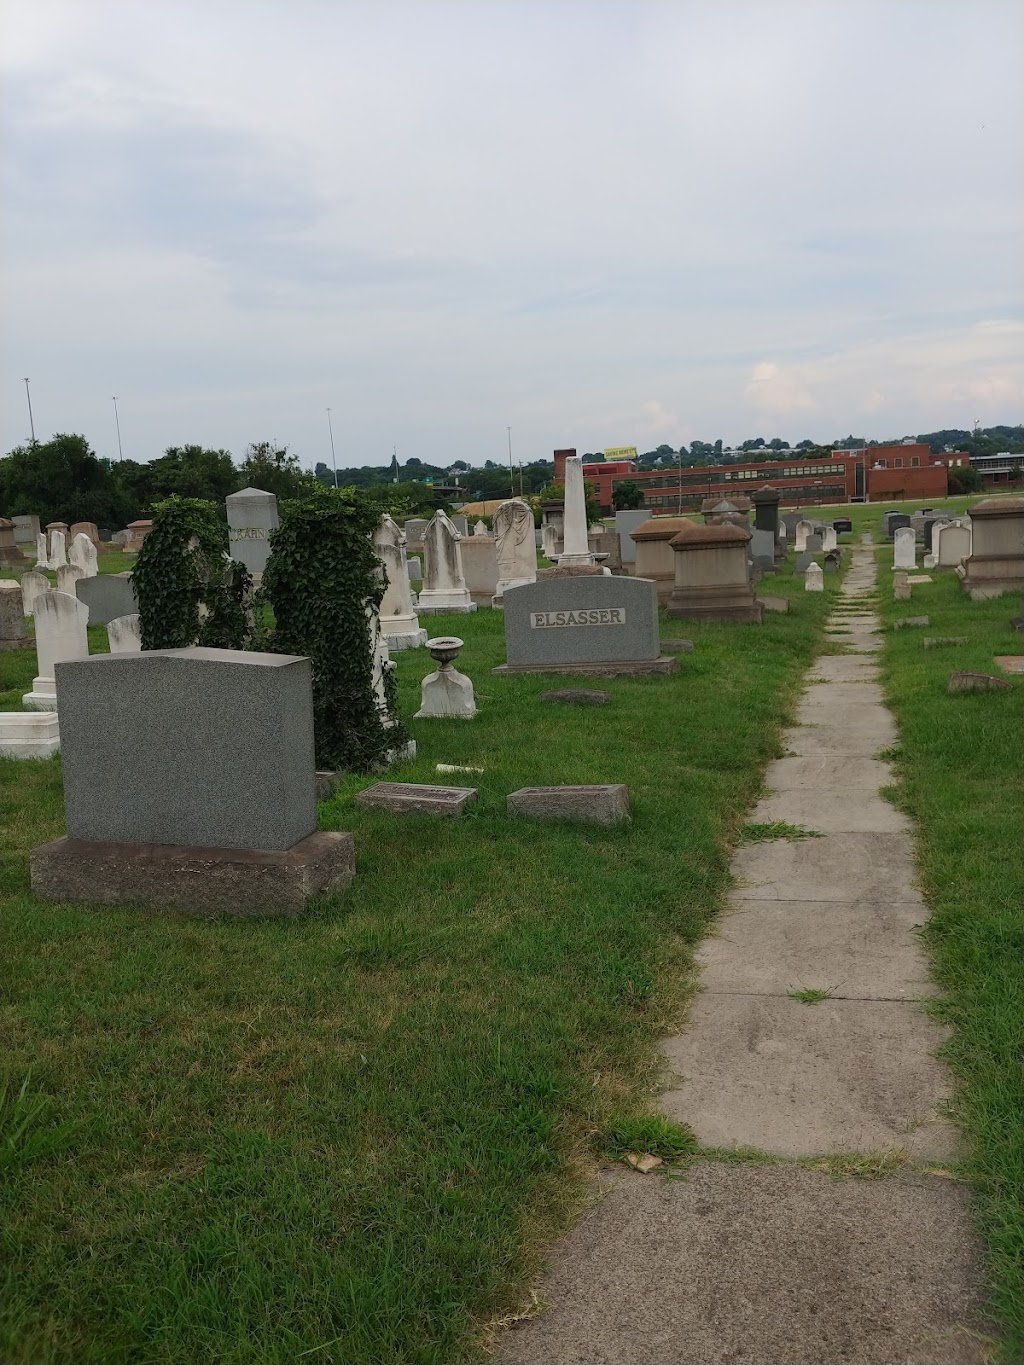 Oheb Shalom Cemetery | 7310 Park Heights Ave, Pikesville, MD 21208, USA | Phone: (410) 358-0105